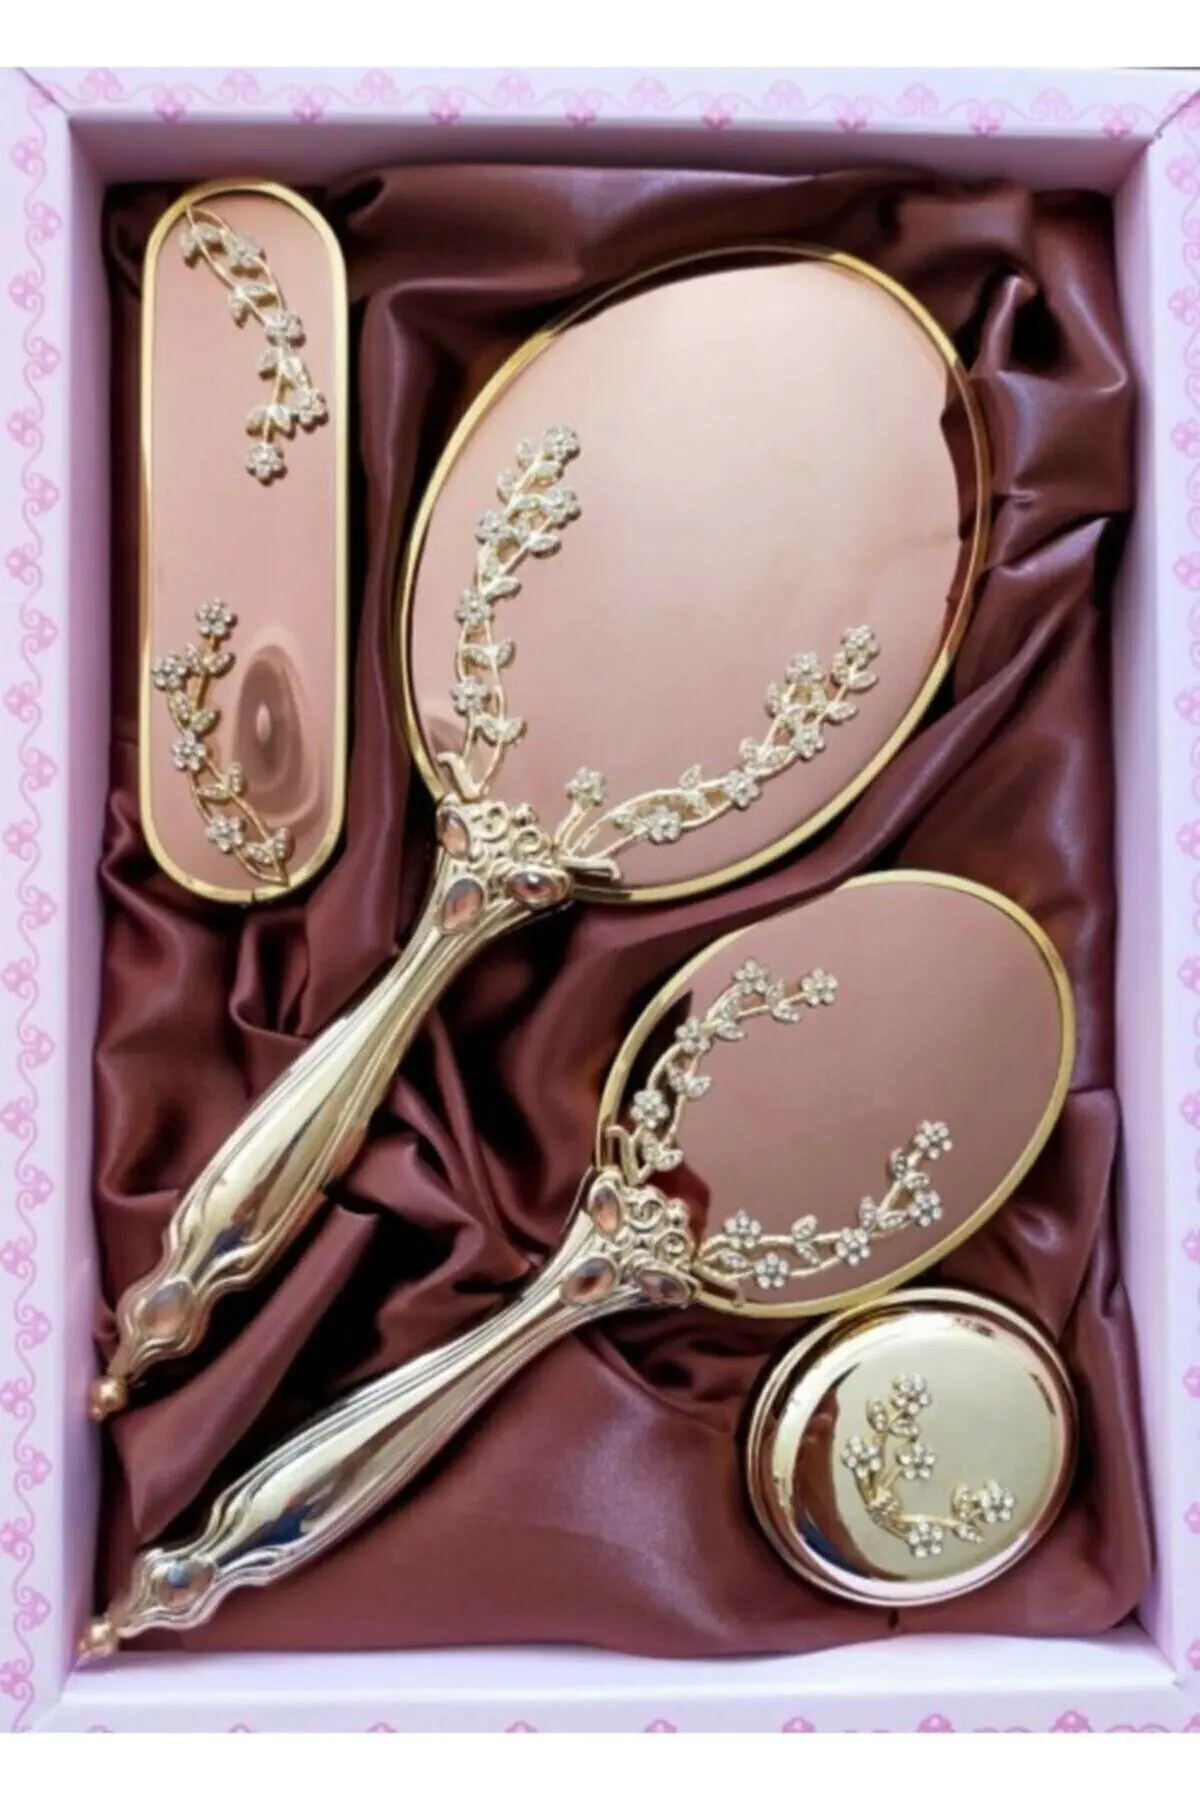 GREAT GIFT Gold Color Ivy Mirror Comb Set of 4 Lux Dowry    FREE SHİPPİNG